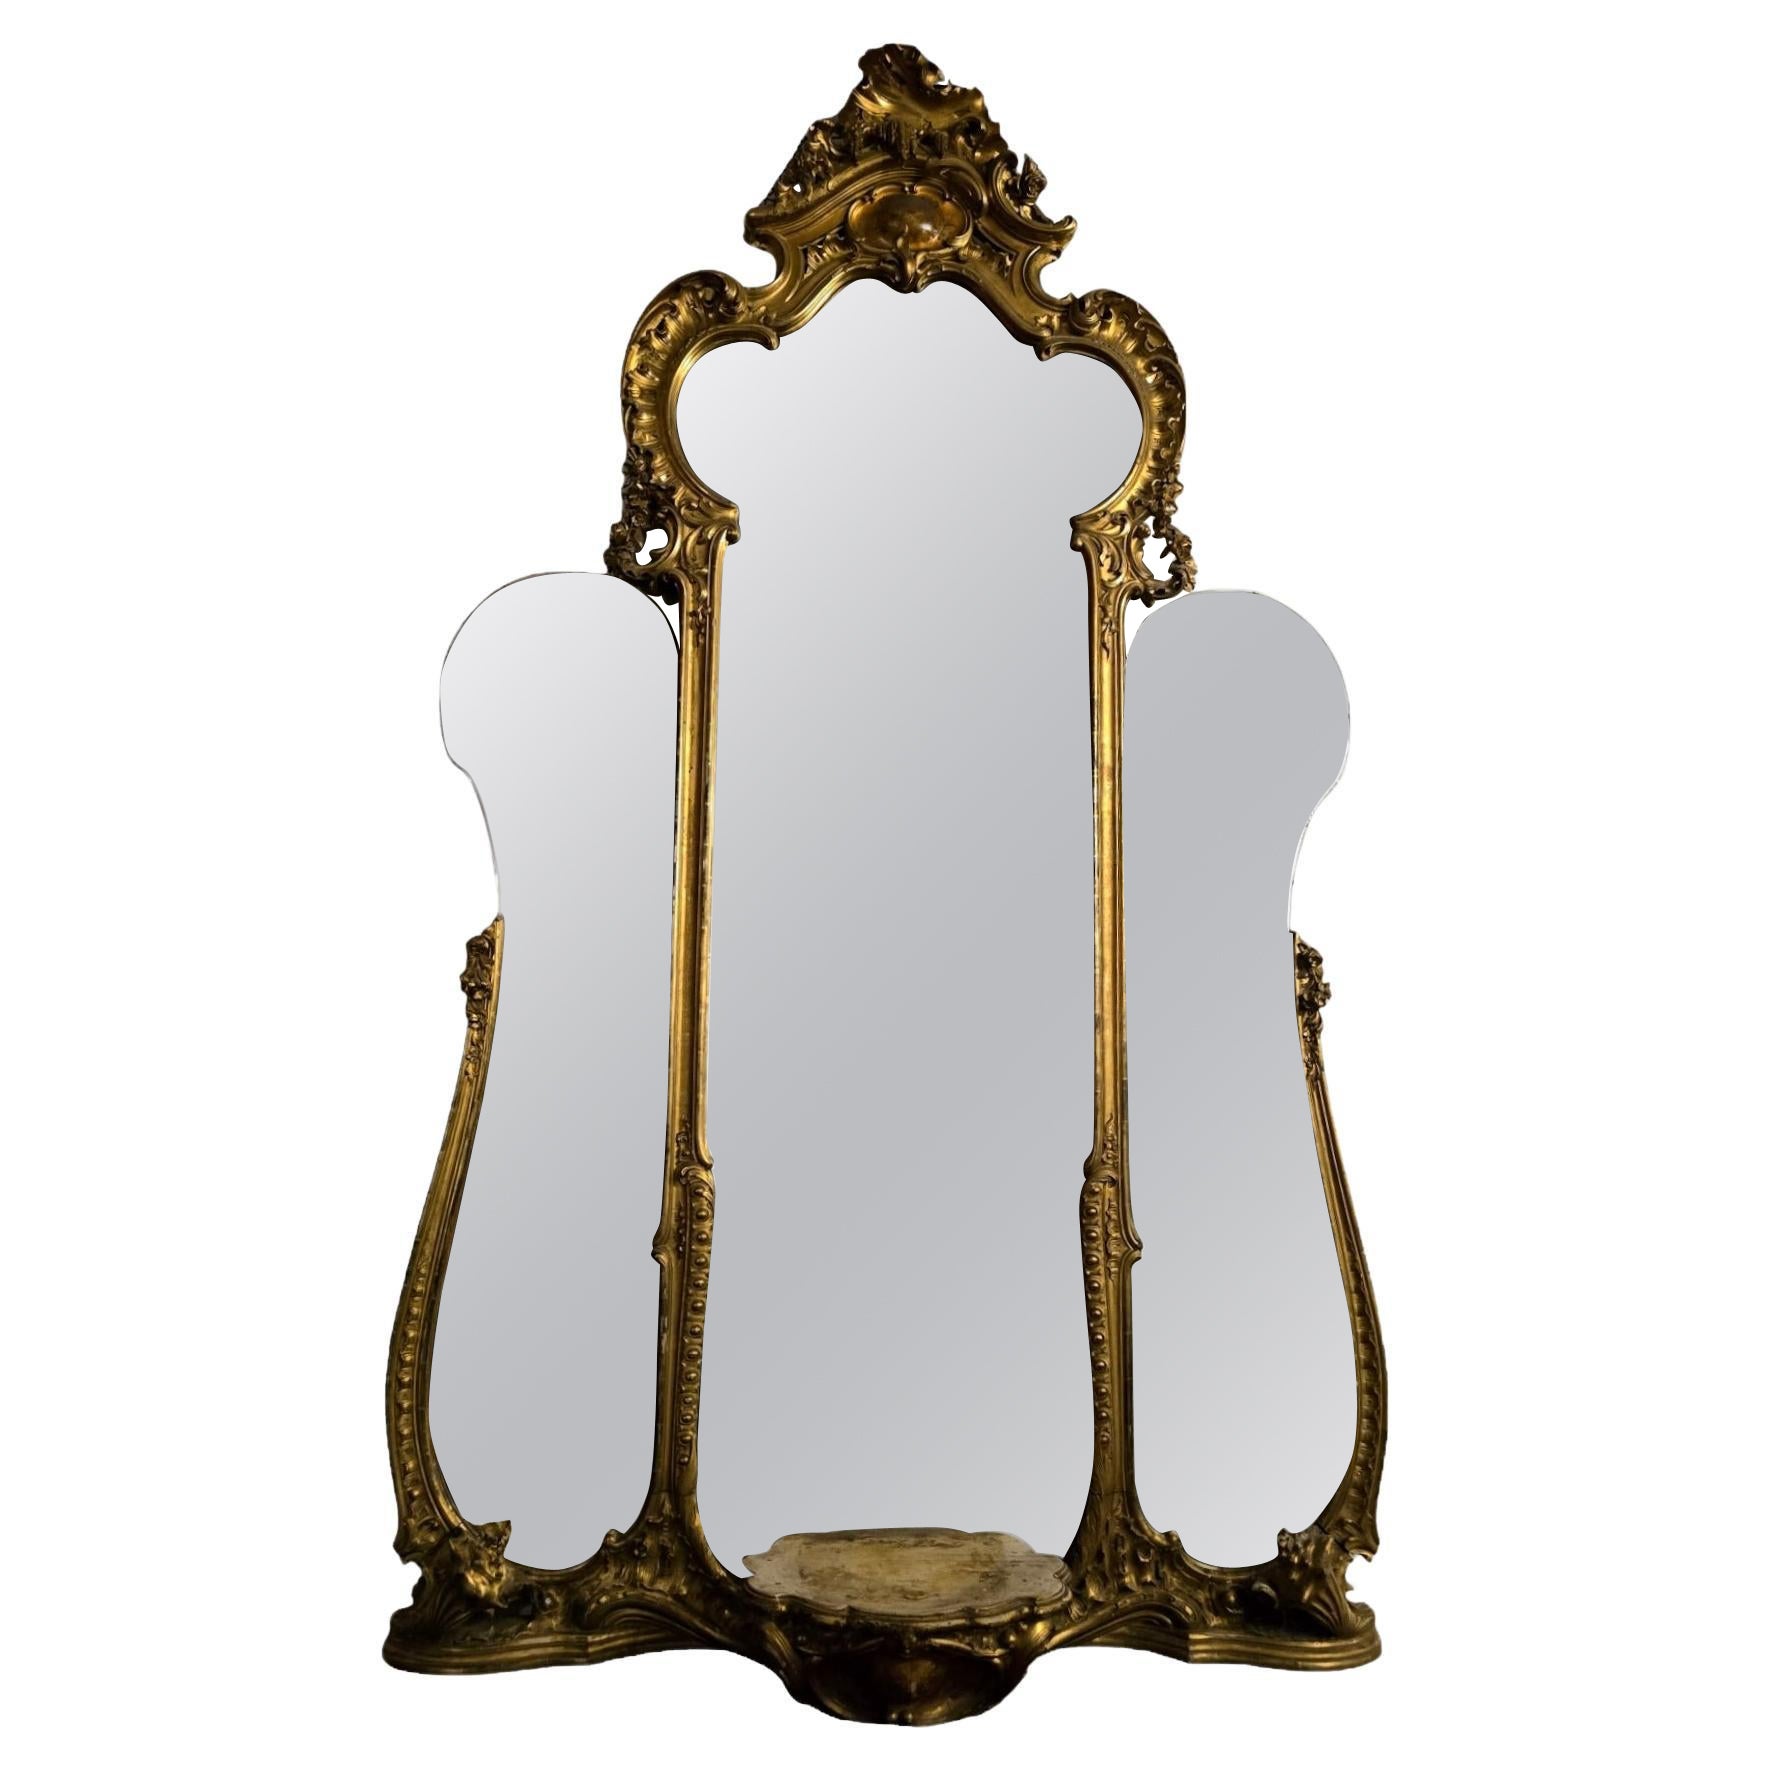 Monumental French Gilded Wood Mirror - A Historical Masterpiece of Luxury For Sale